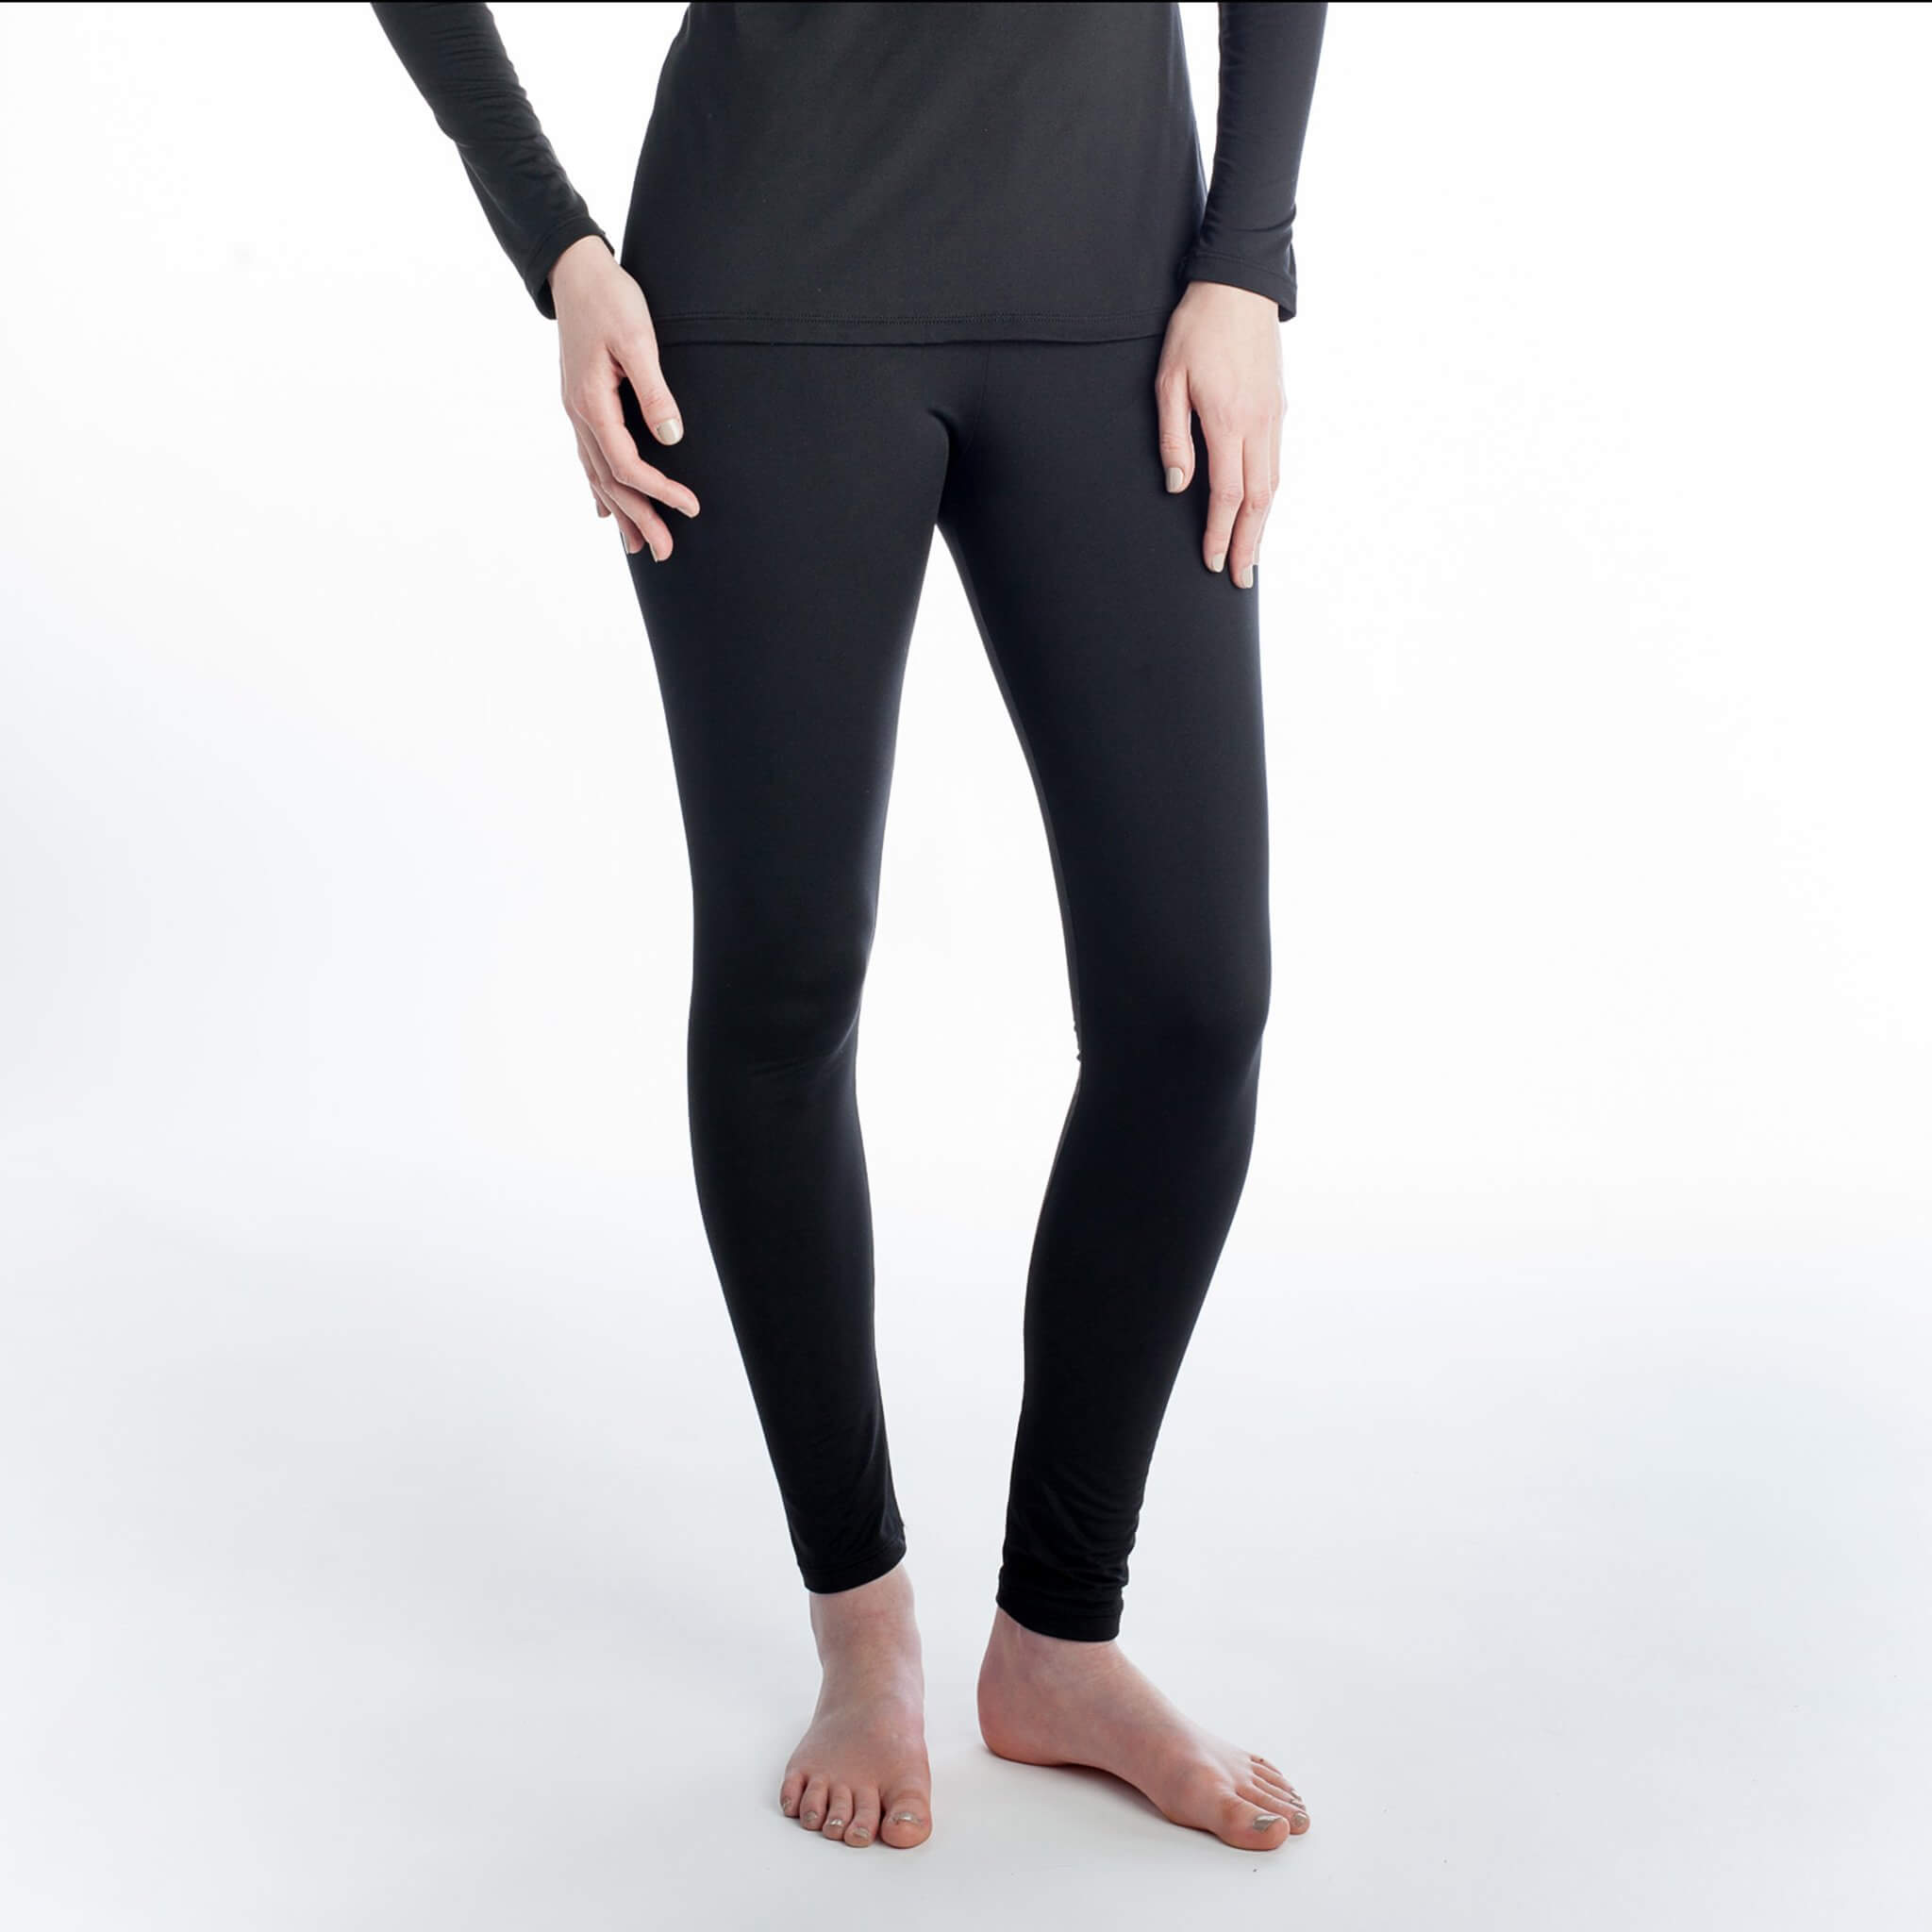 Warm & Cozy merino wool leggings - Perfect as a base layer all